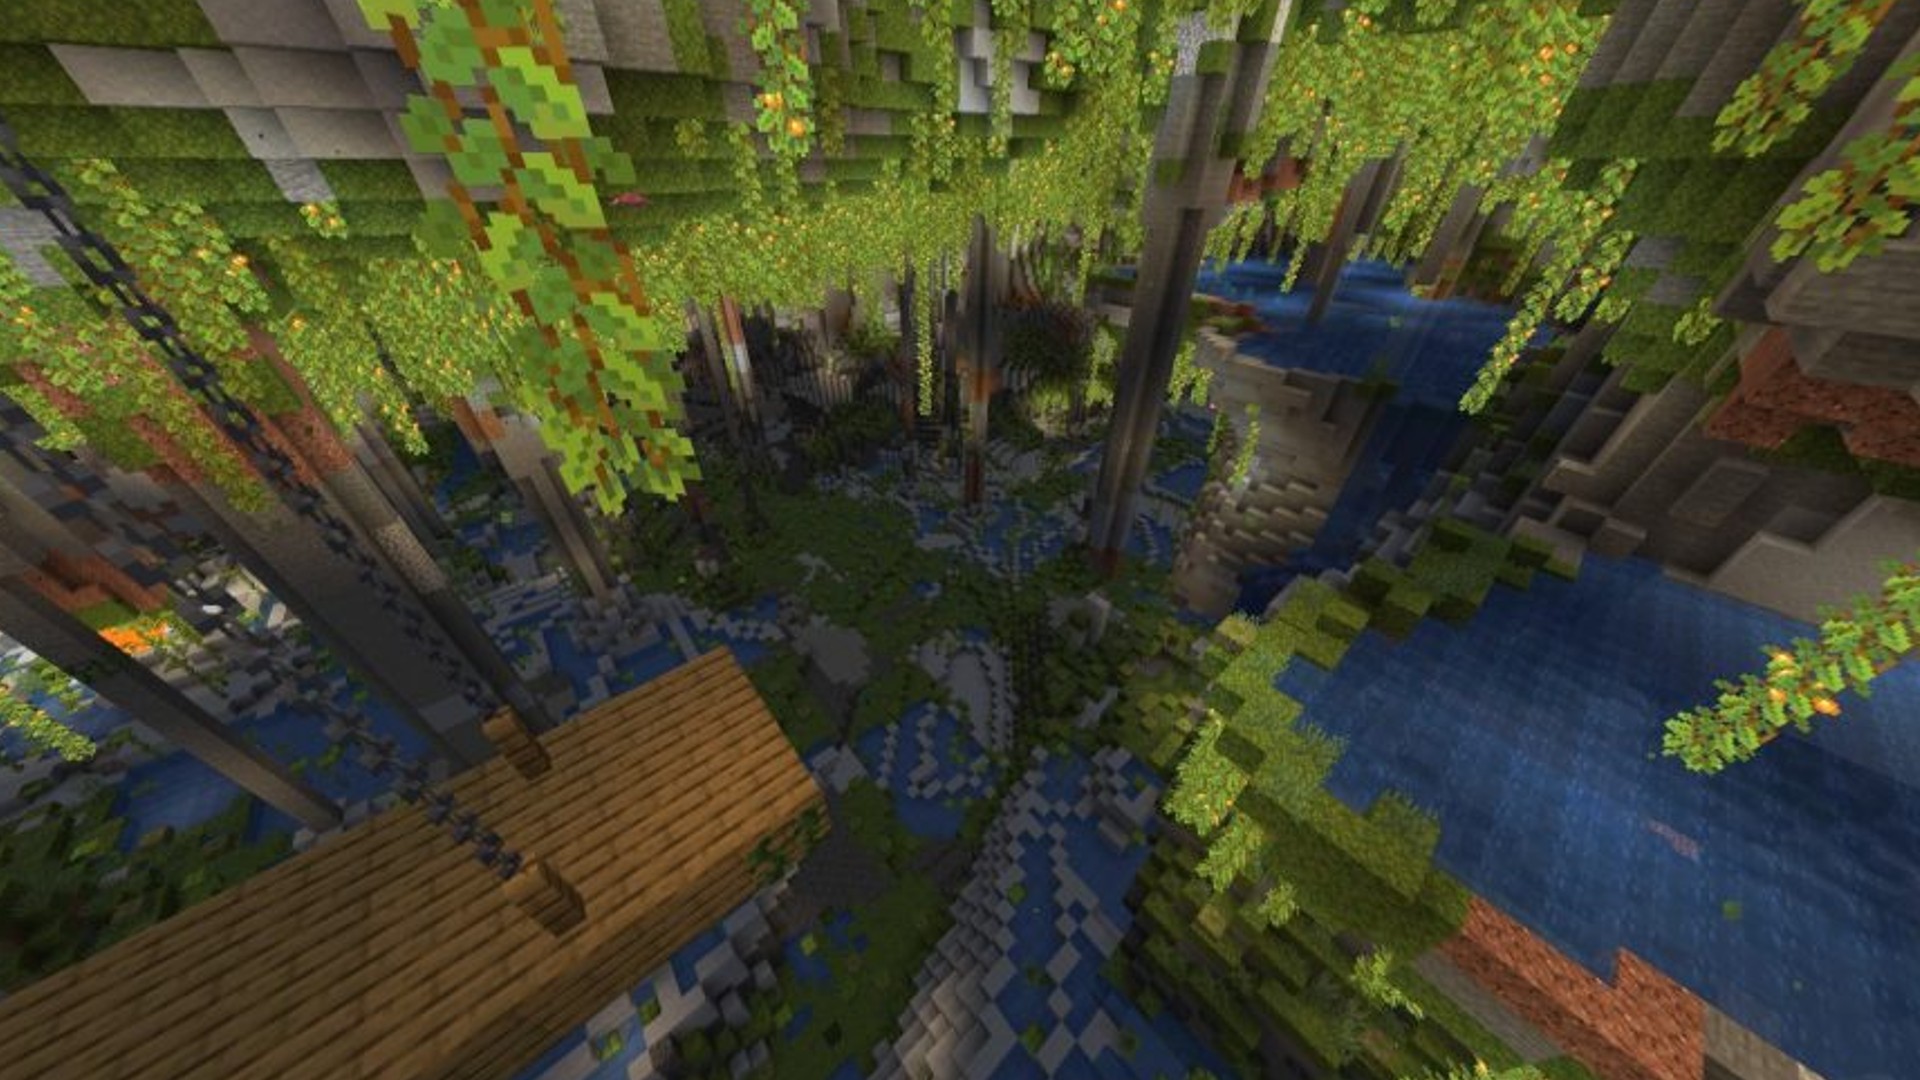 5 best Minecraft seeds for flat land in 2021